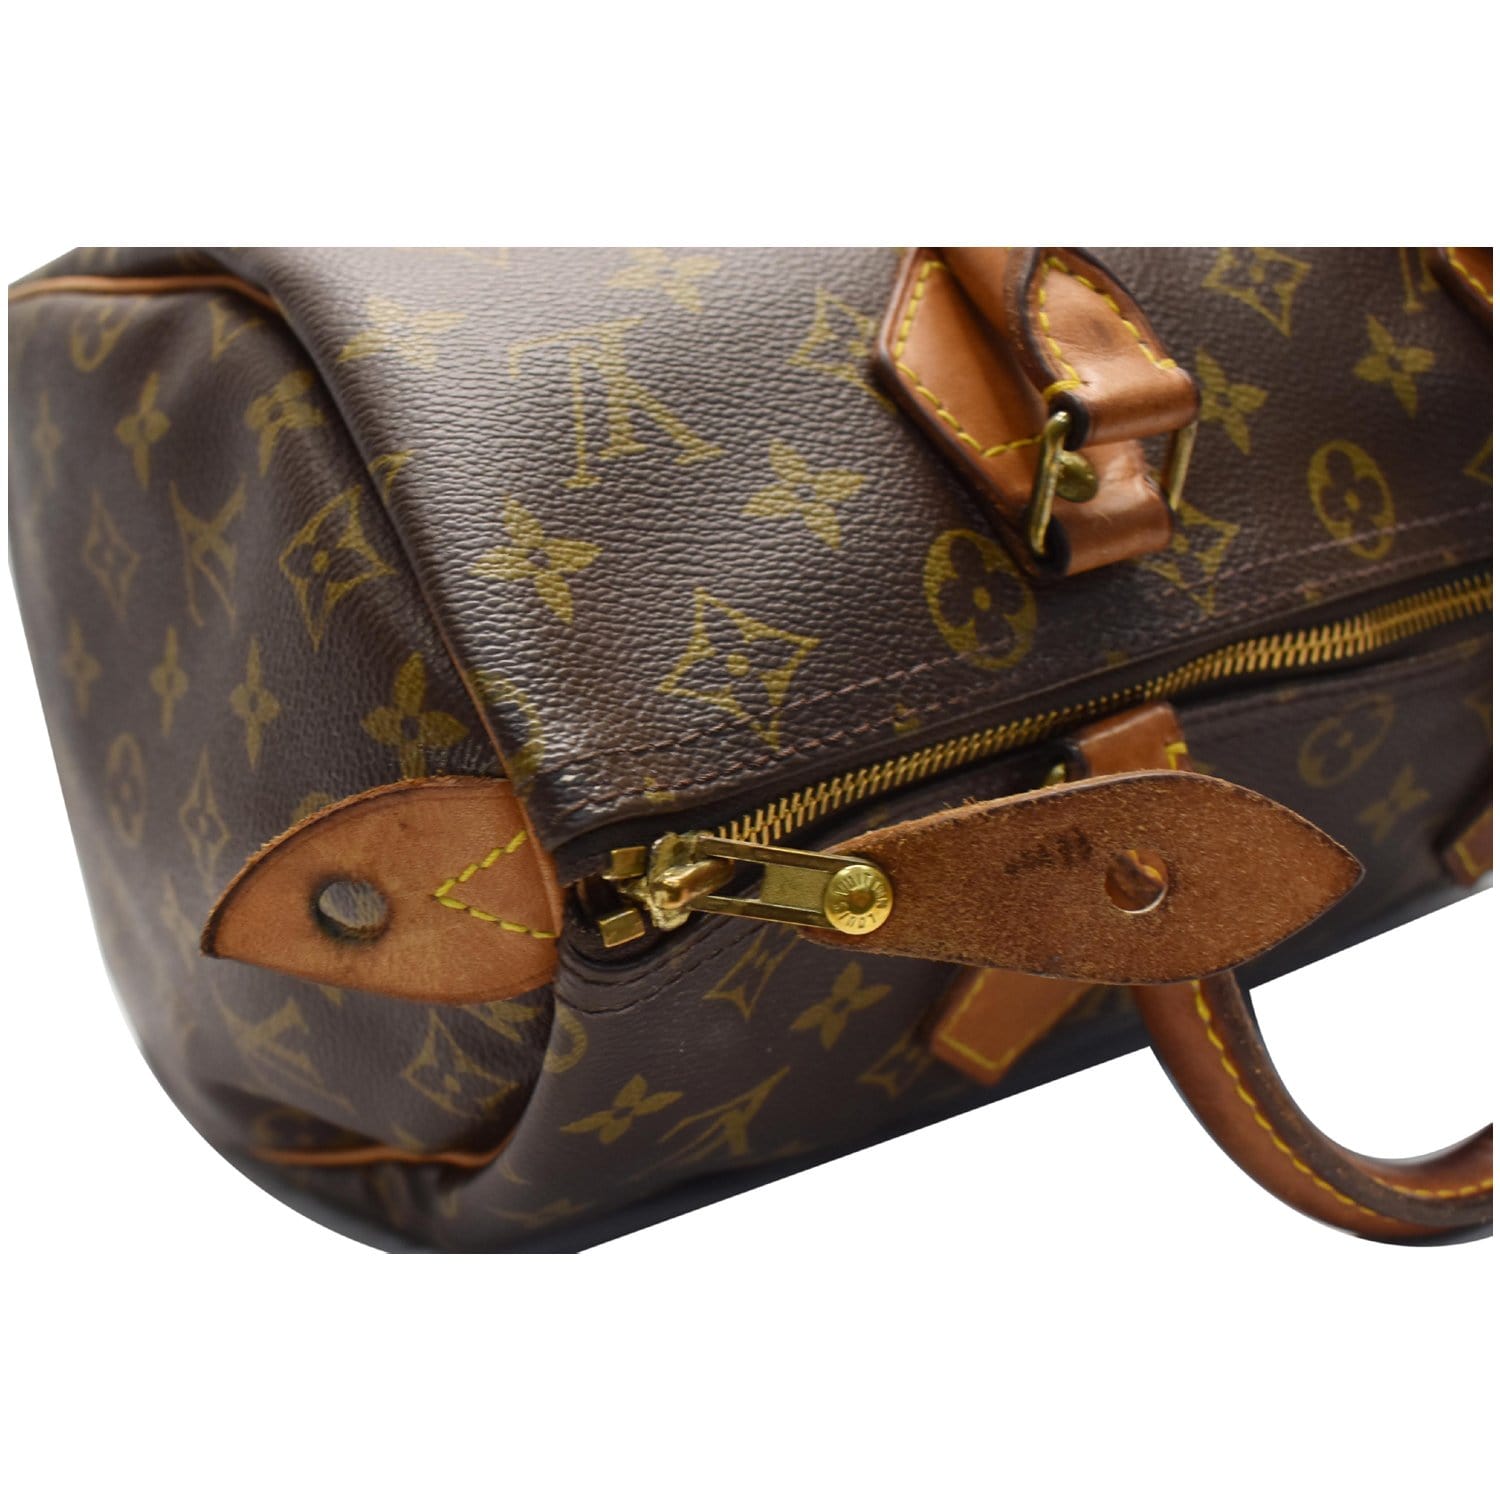 TARJETERO LOUIS VUITTON REVERSO - Detail shot of Wests red Louis Vuitton  Don sneakers - Louis Vuitton Speedy 30 handbag in brown monogram canvas  Idylle and brown leather - PRE LOVED